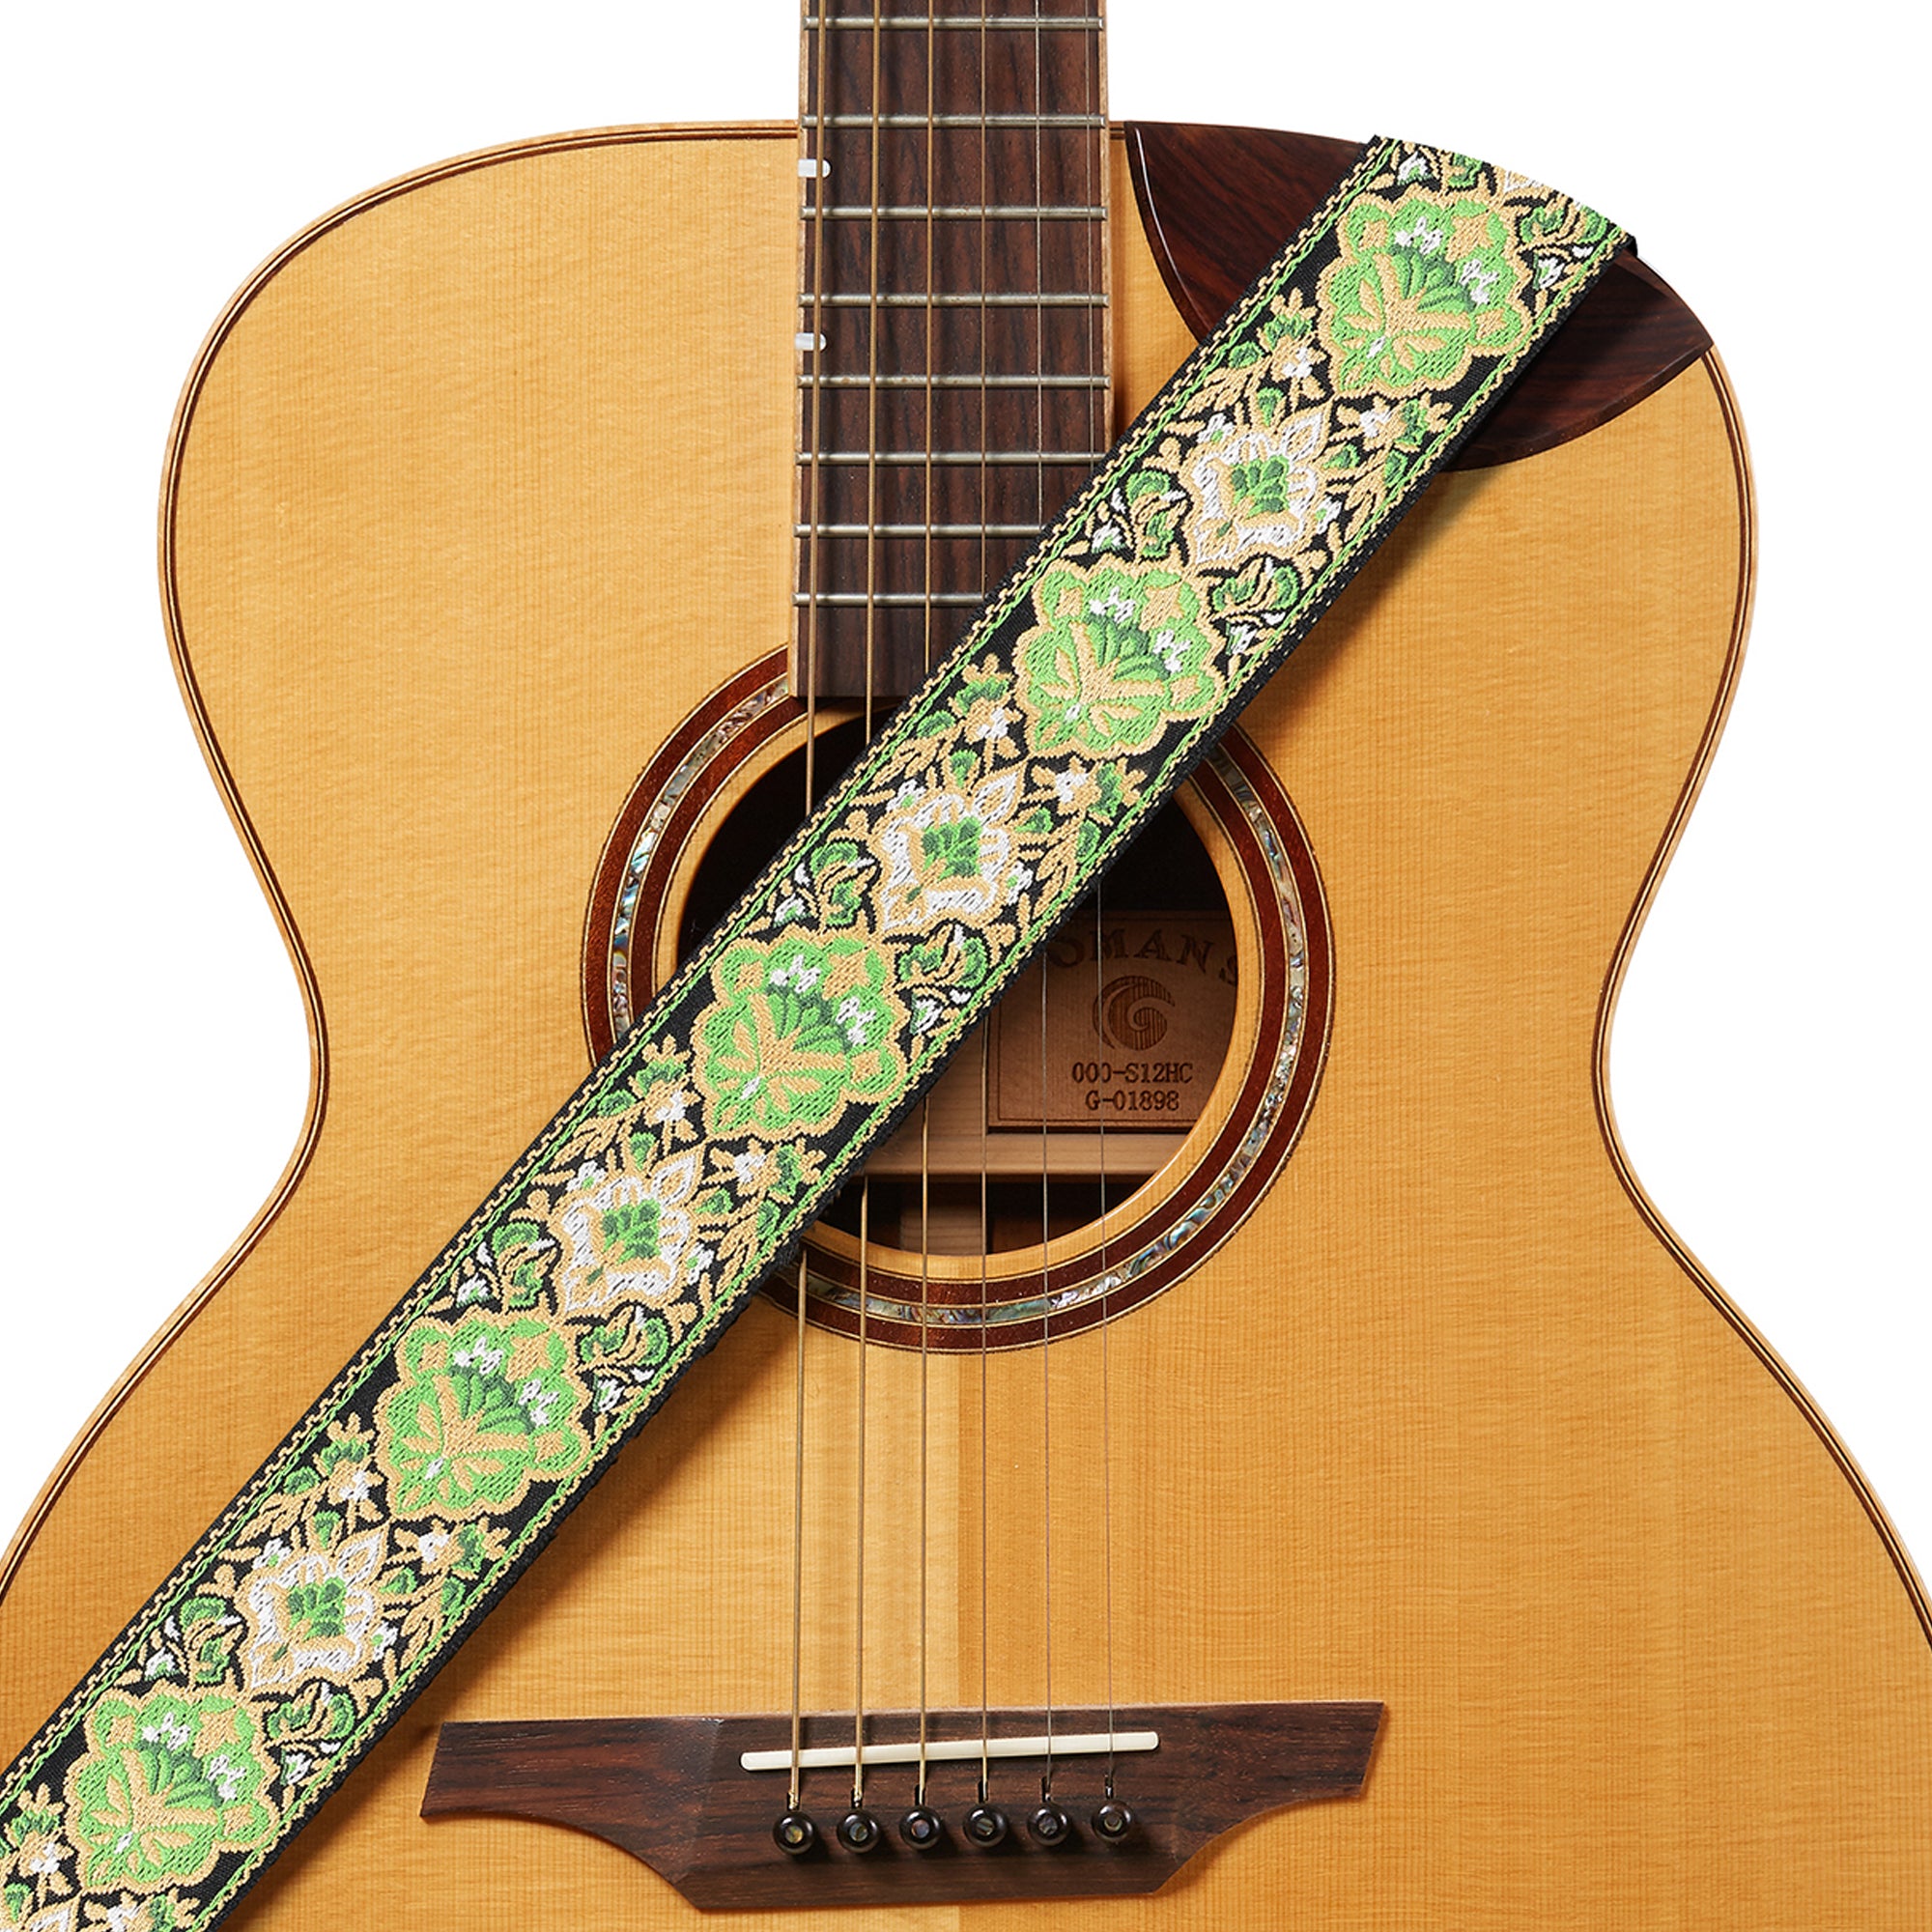 Guitar Strap For Acoustic Guitars , Electric Guitars and Bass , Red Vintage  Woven Embroidered Adjustable Strap Includes 2 Strap Locks To Keep Your